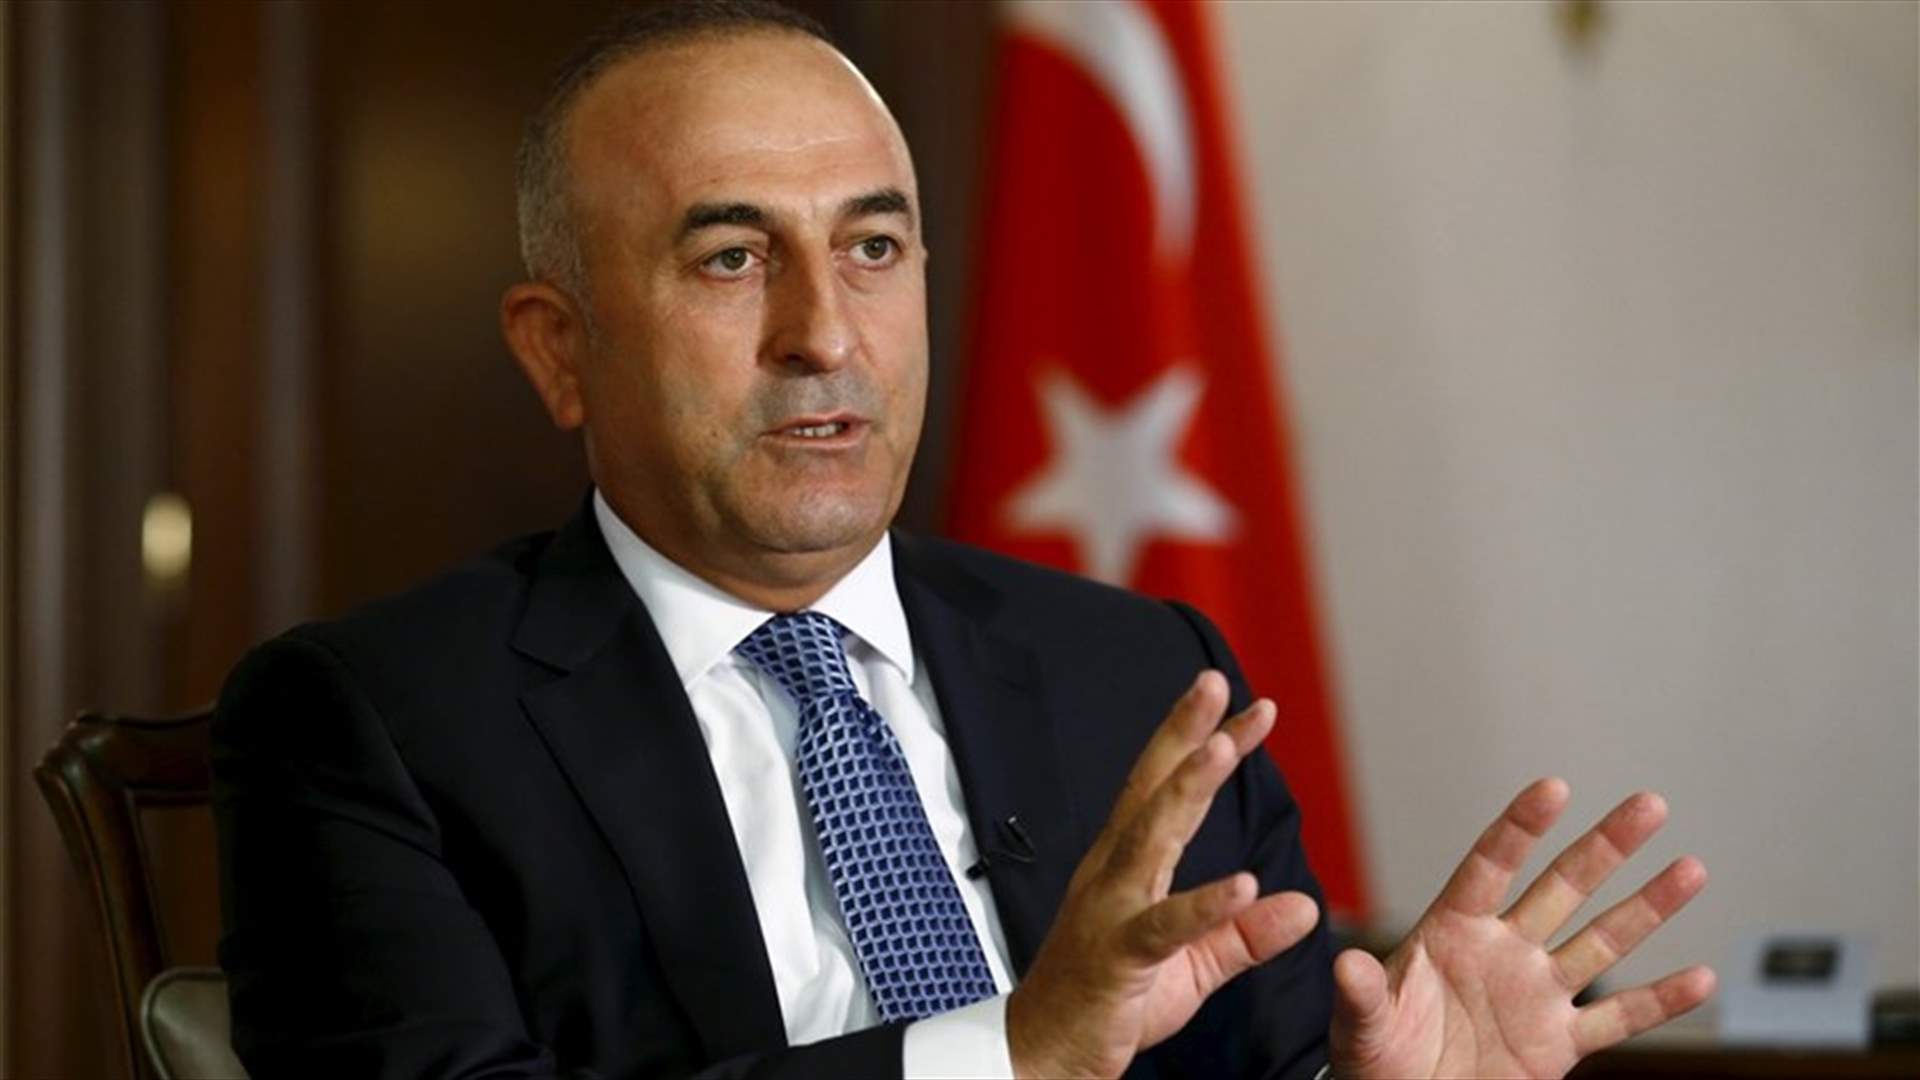 No need to take EU steps against Turkey seriously - foreign minister